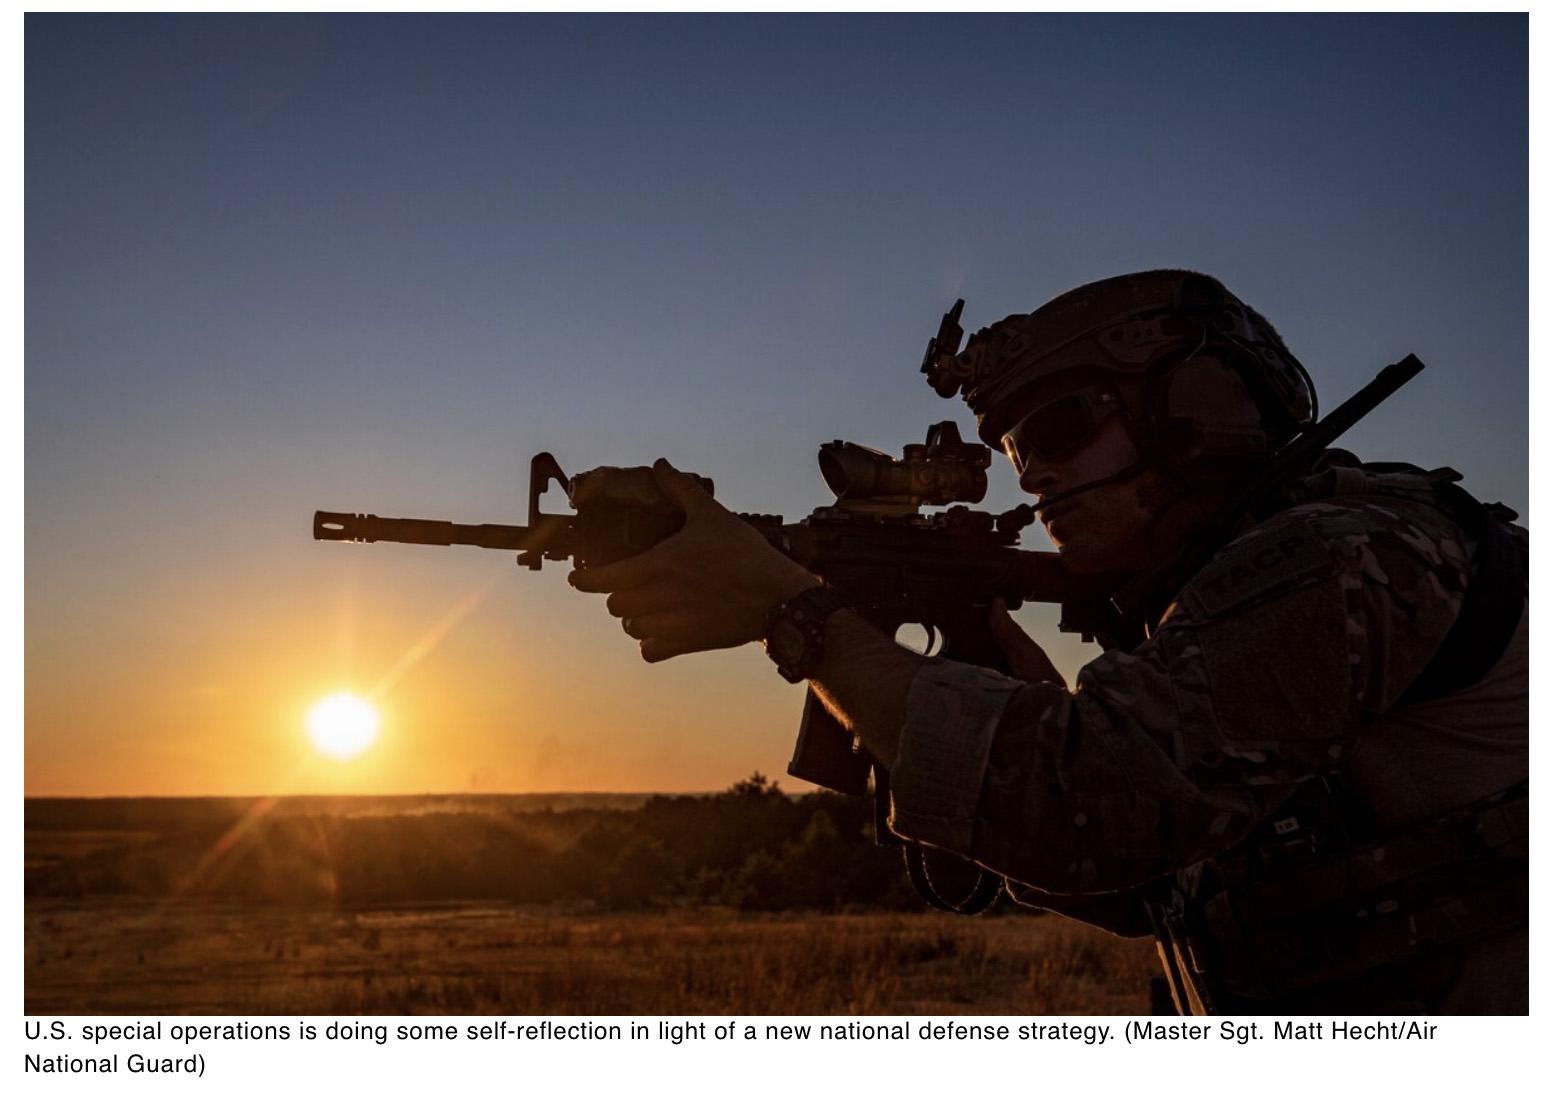  After decades focused on terrorism, special operations is broadening its horizons